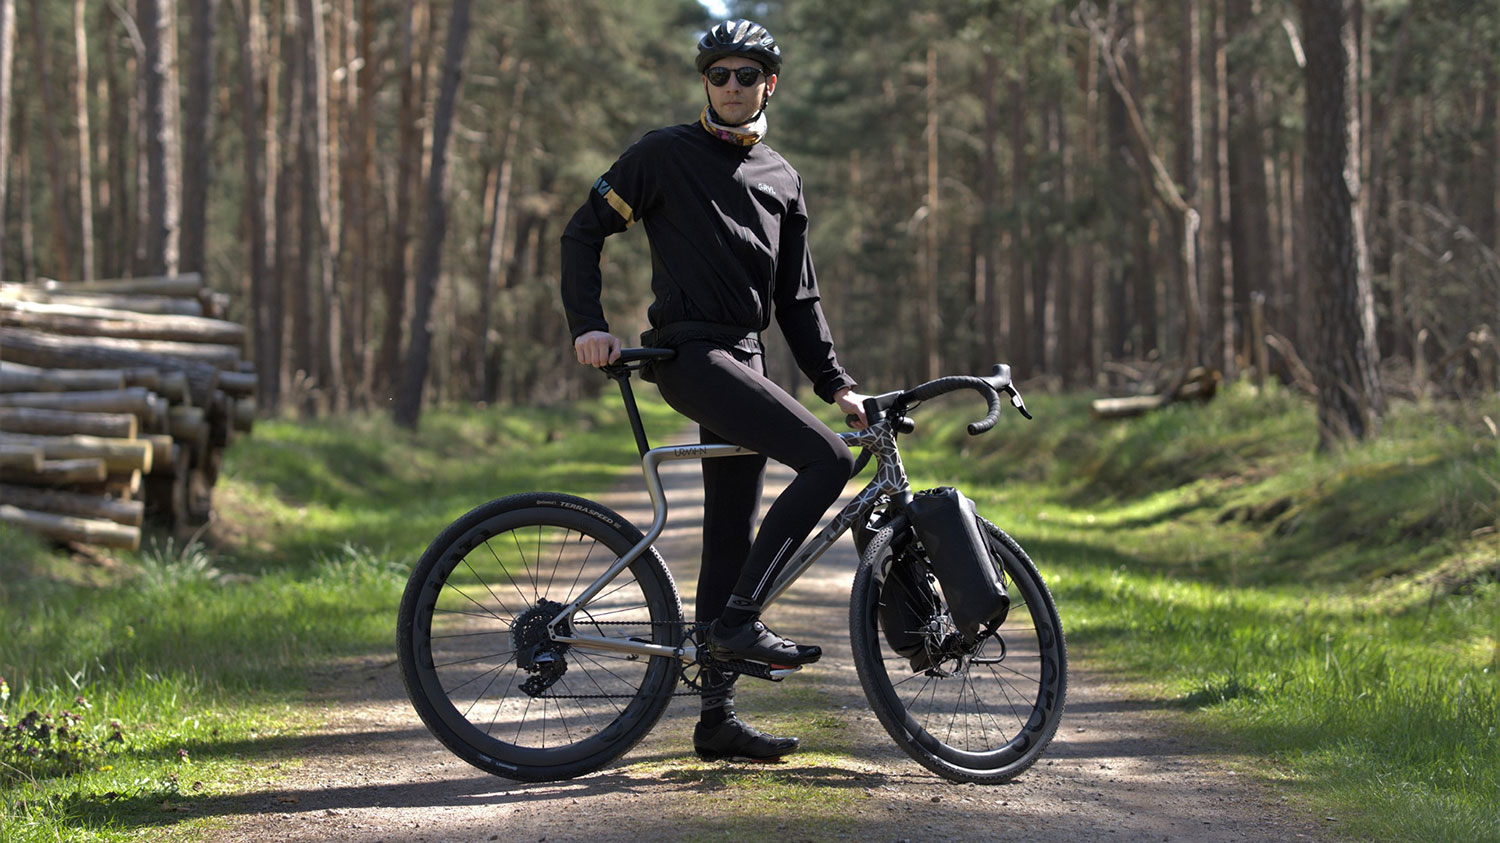 Urwahn launches its first Acros Edition gravel bike.